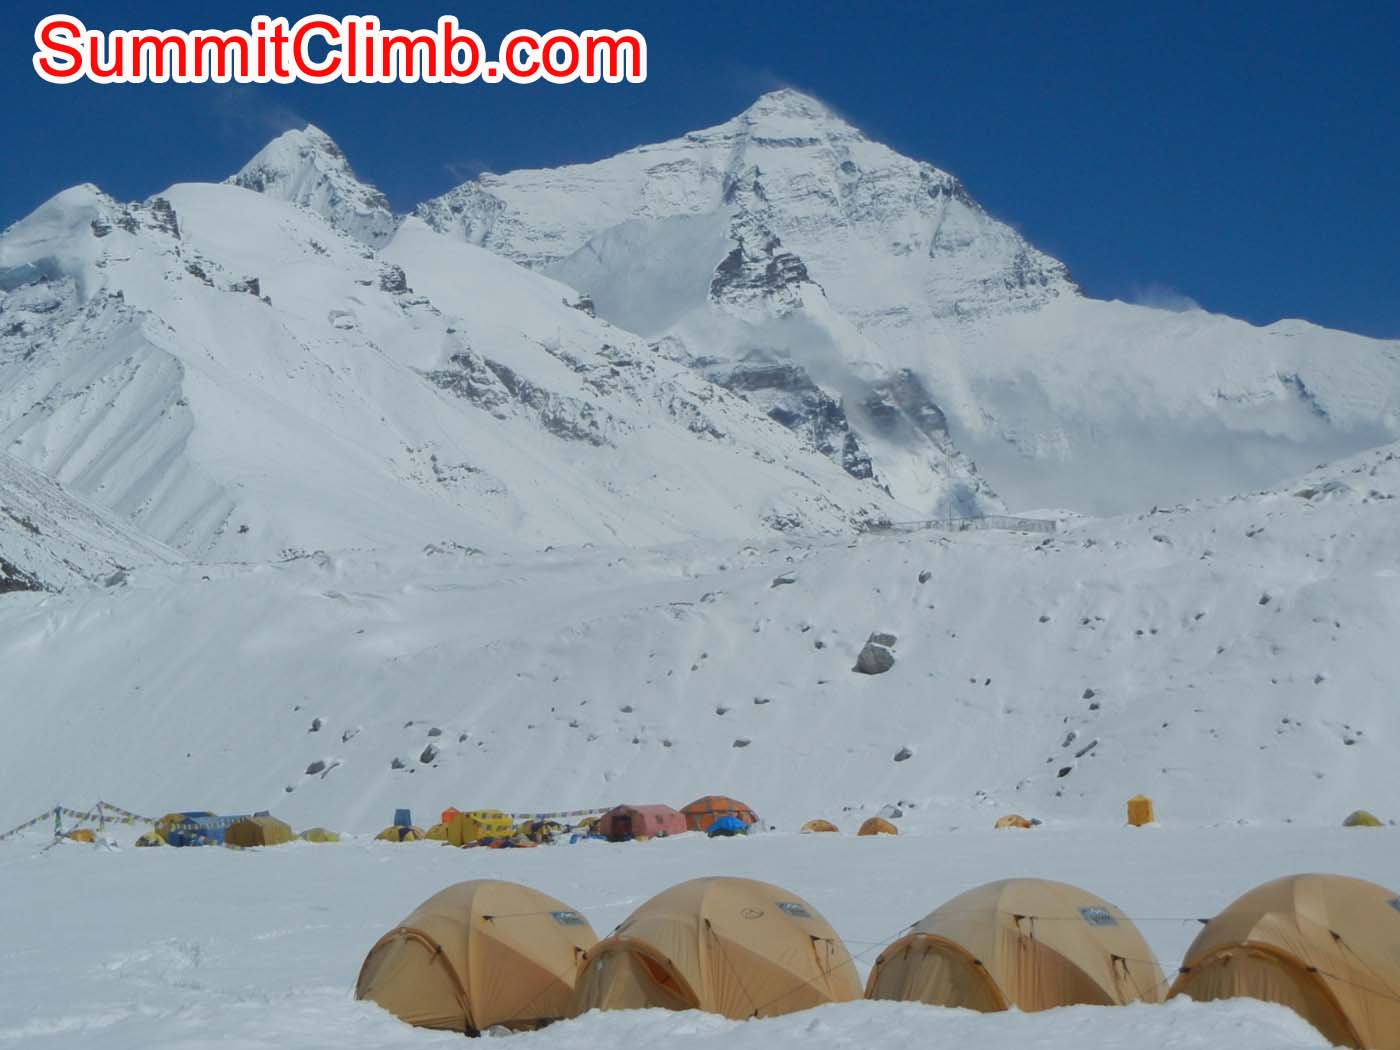 Everest and Basecamp after storm dropped over 1 meter of snow at Basecamp - Photo Scott Patch